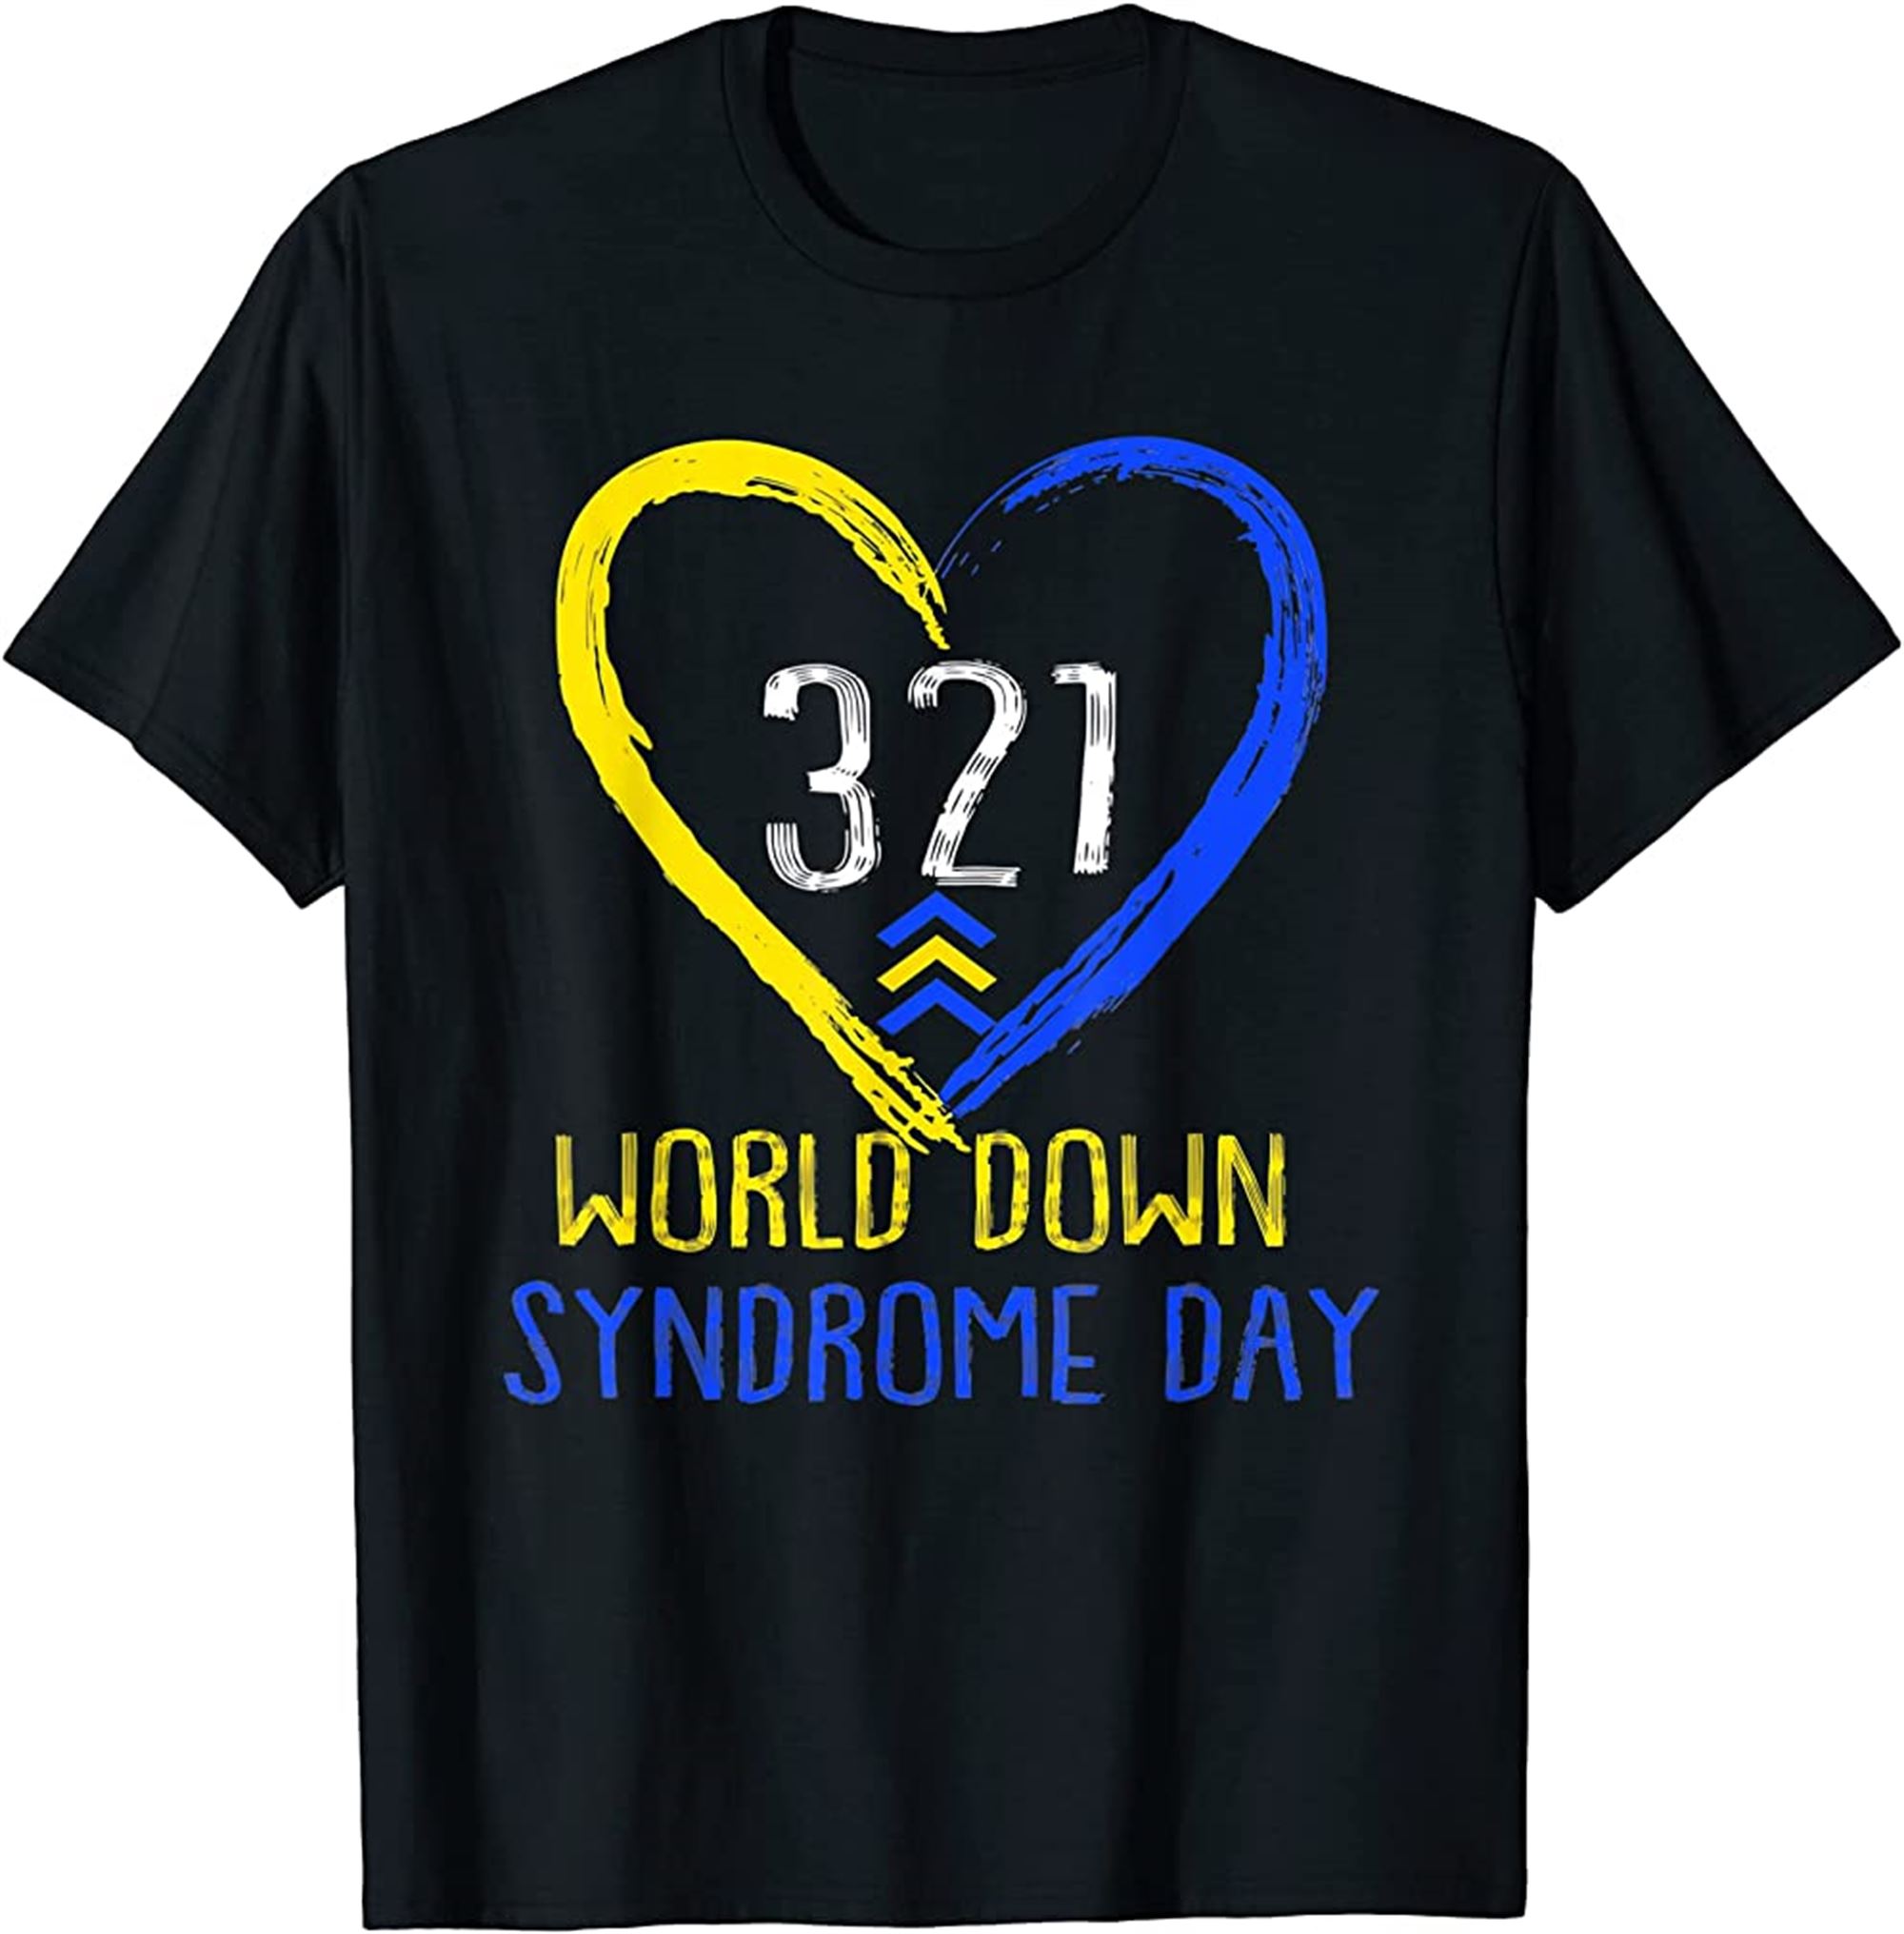 World Down Syndrome Day Awareness And Support 21 March T-shirt Size Up To 5xl